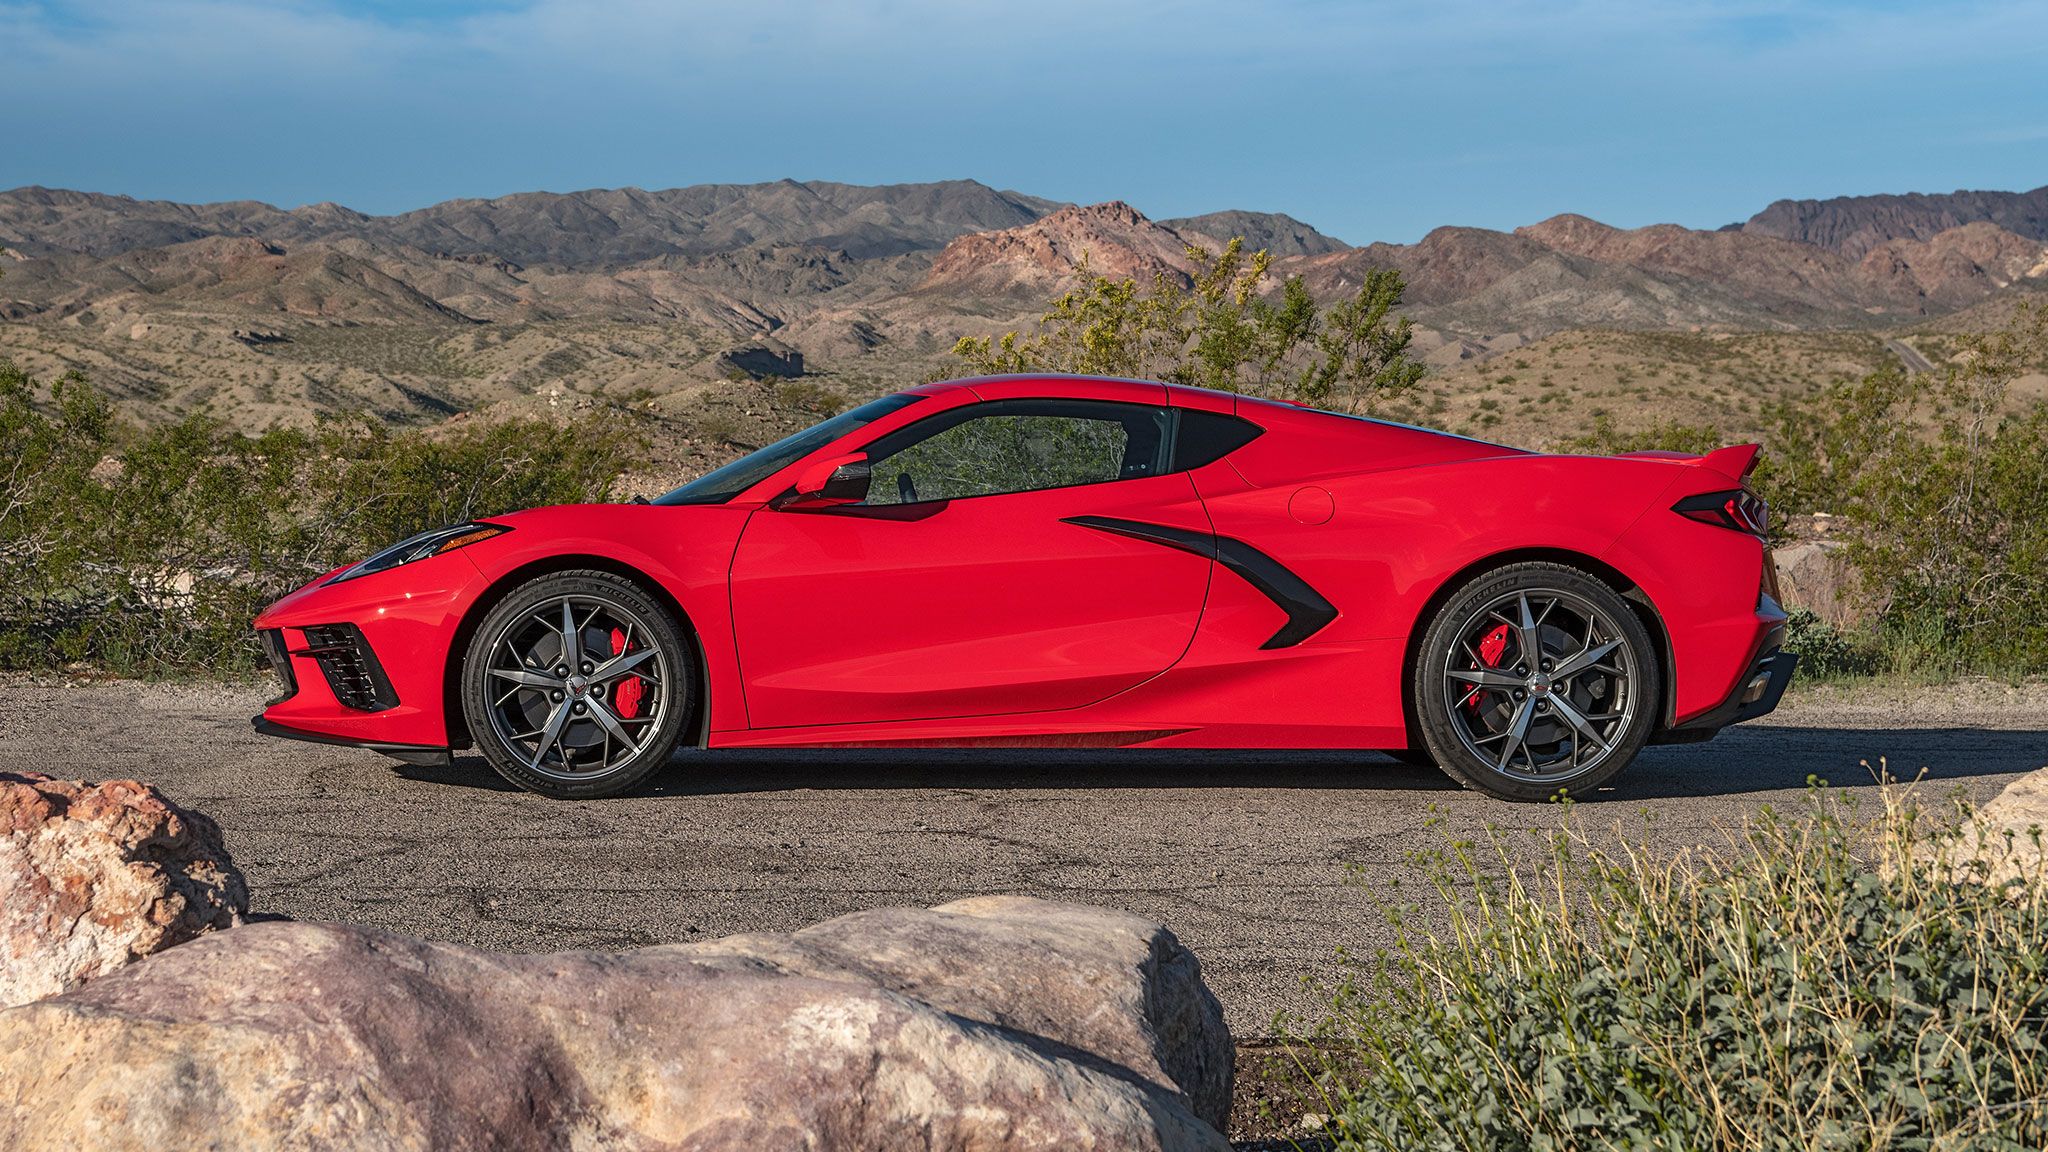 A red 2021 Chevrolet Corvette C8 stands parked on a road near the dessert.